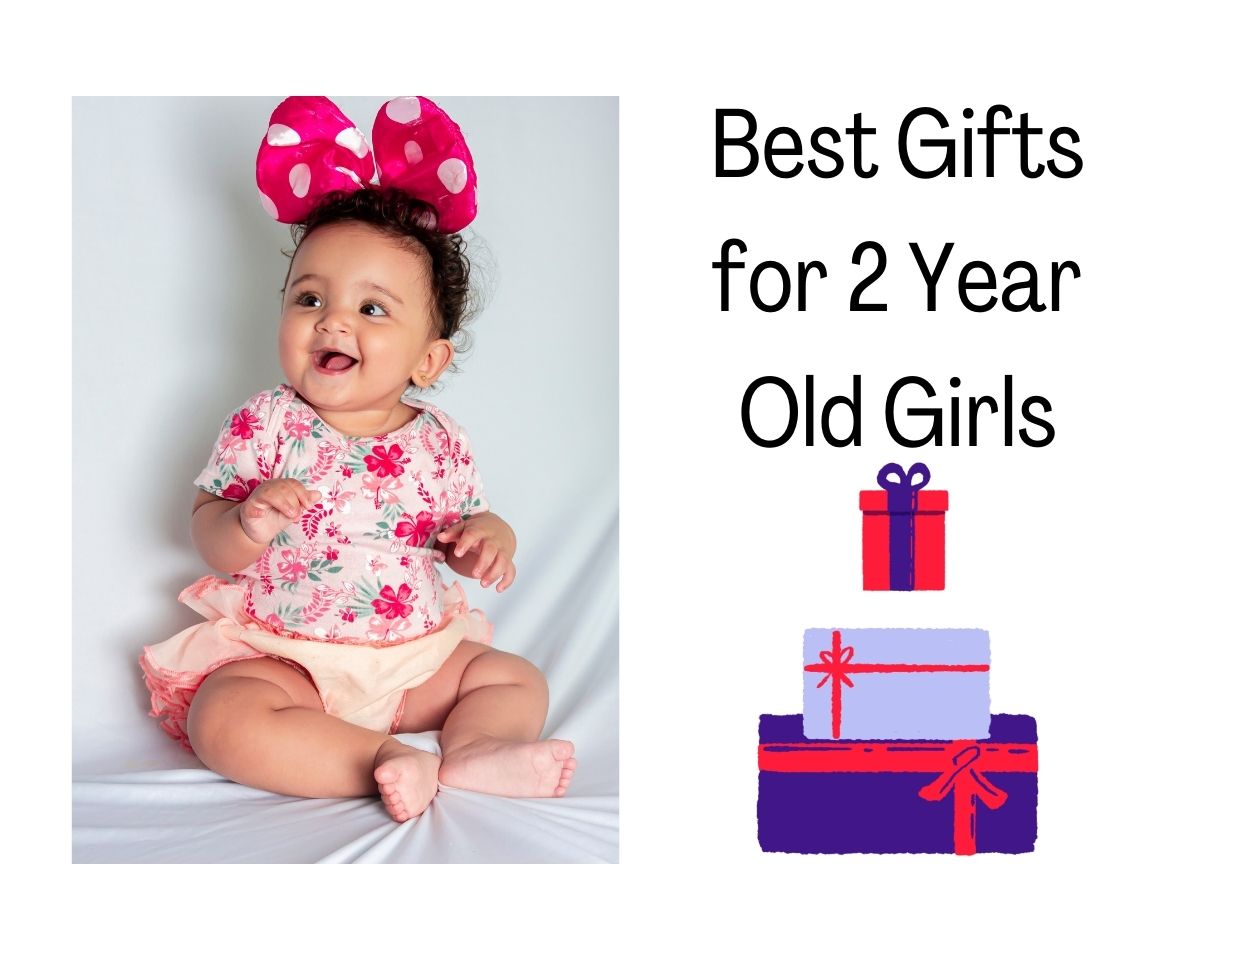 Best Gifts for 2 Year Old Girls